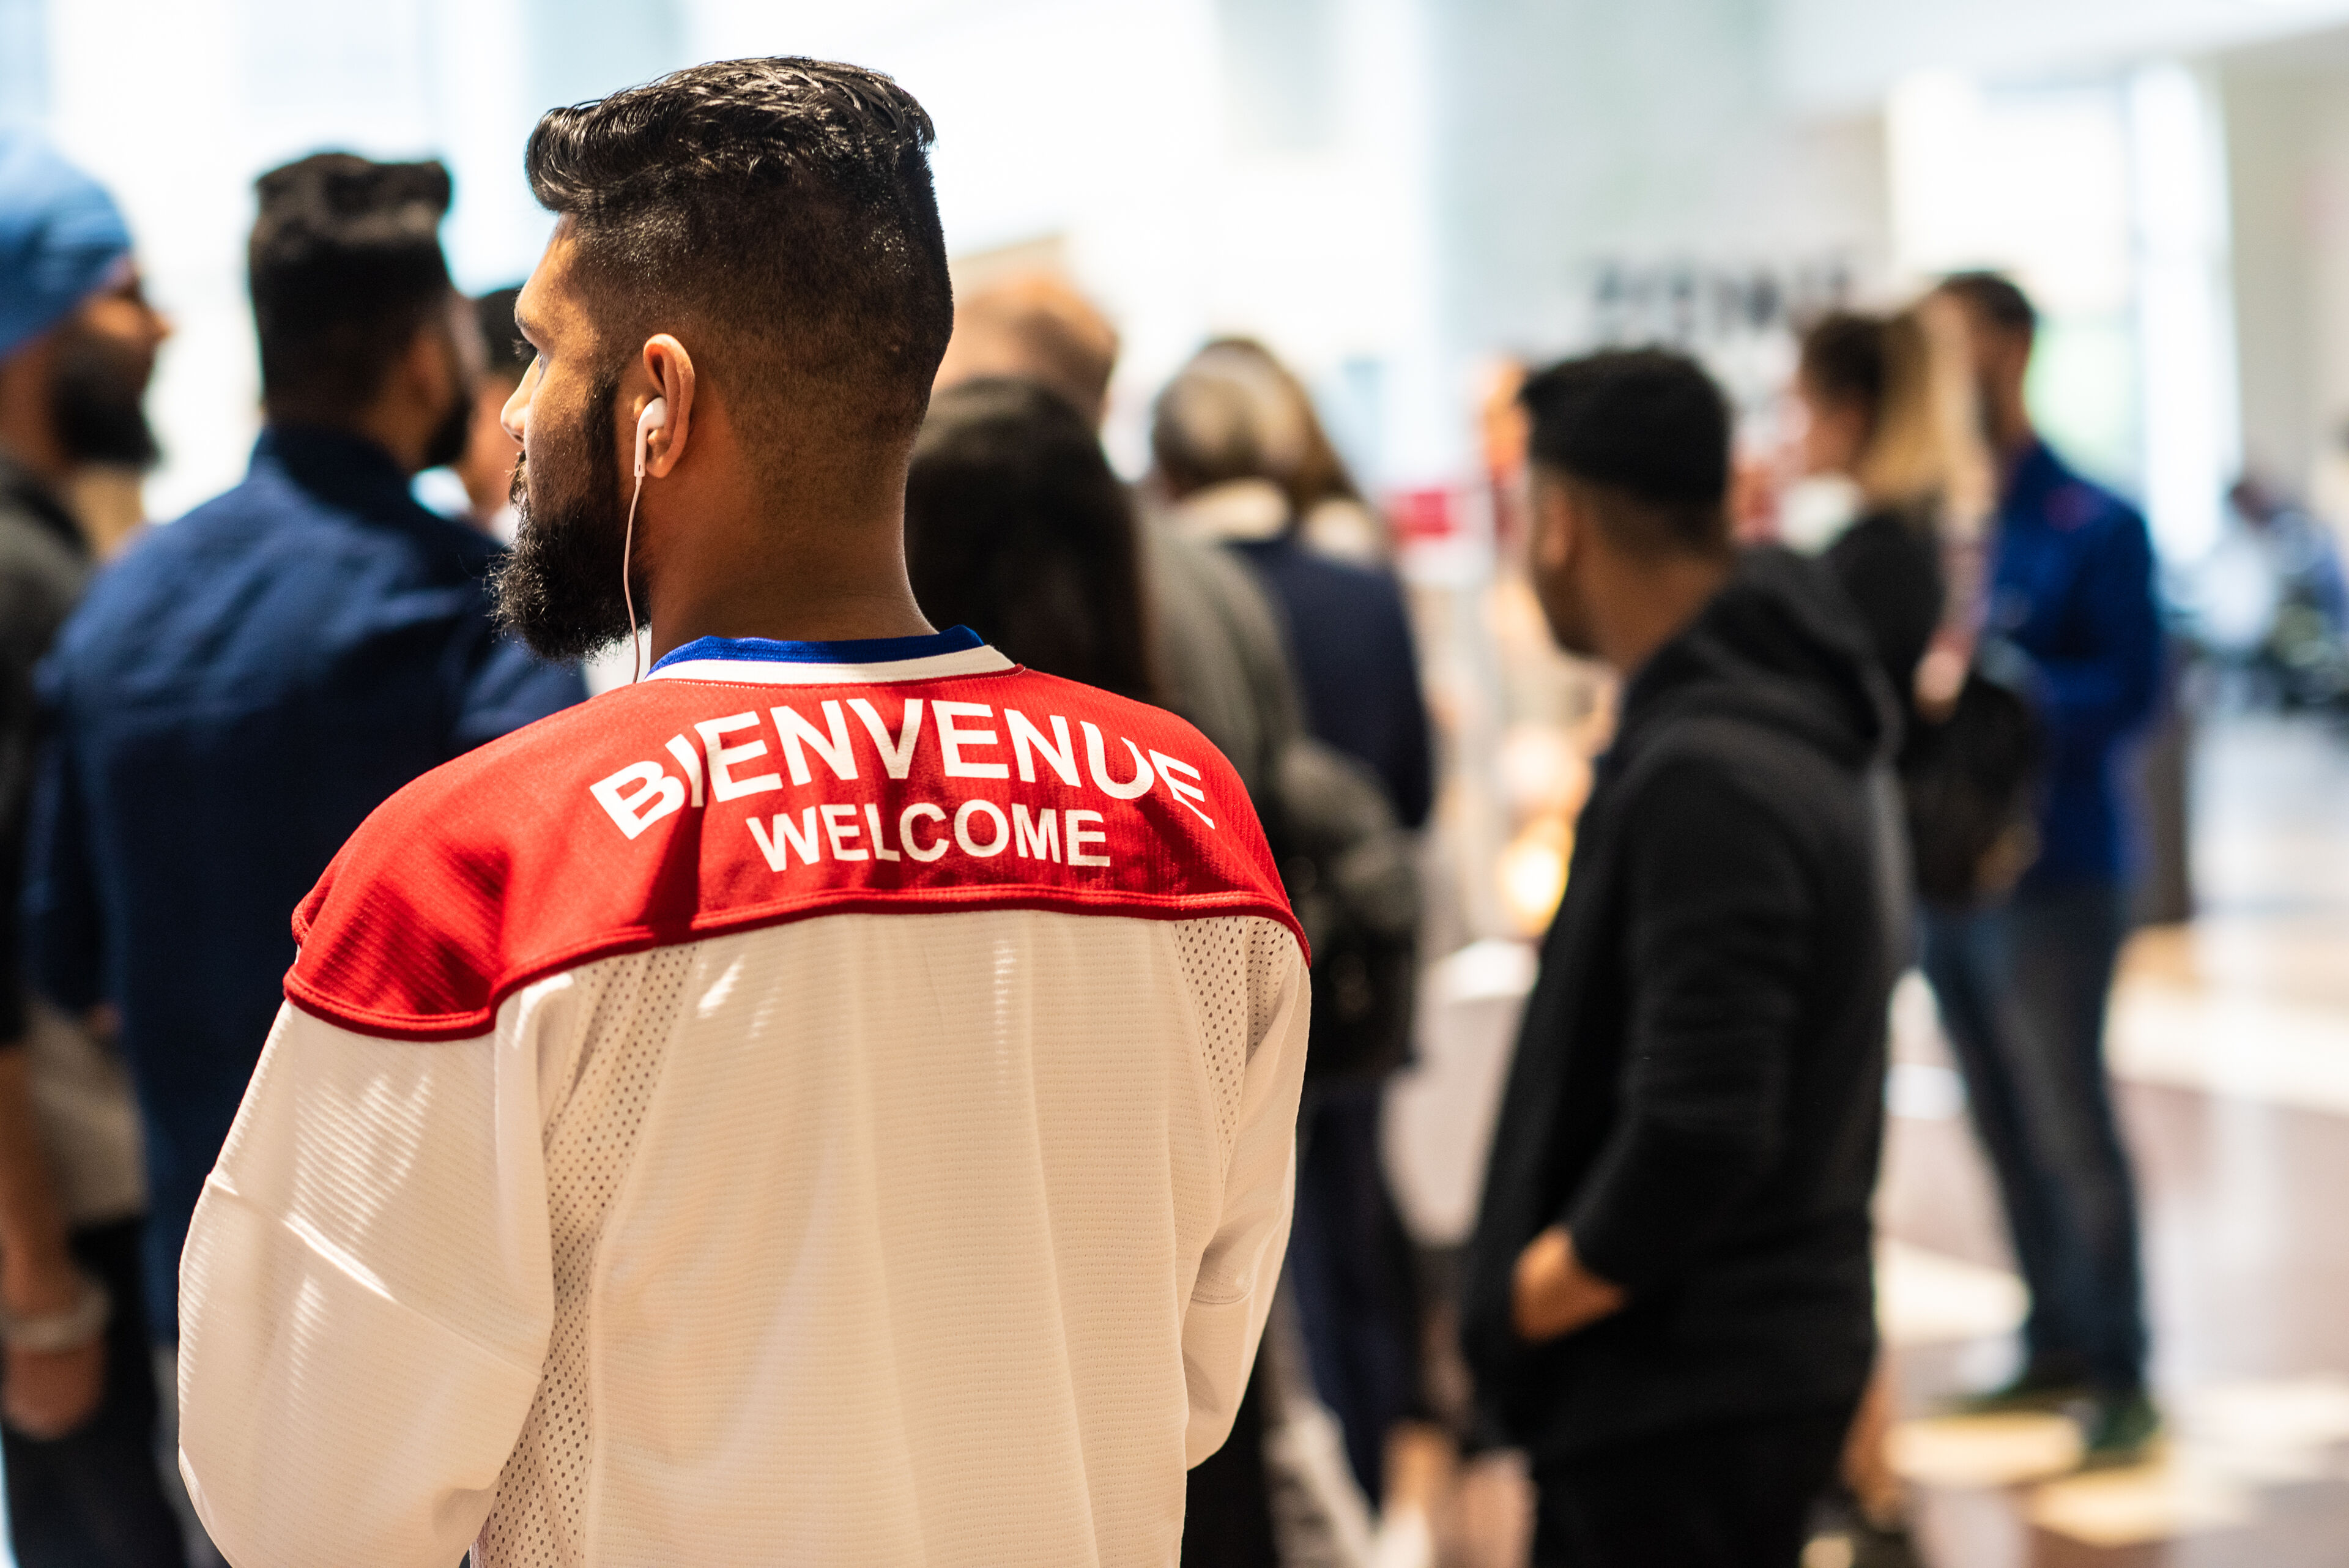 A man wearing a jersey with 'Bienvenue - Welcome' stands amidst a crowd, symbolizing a warm, multilingual greeting.